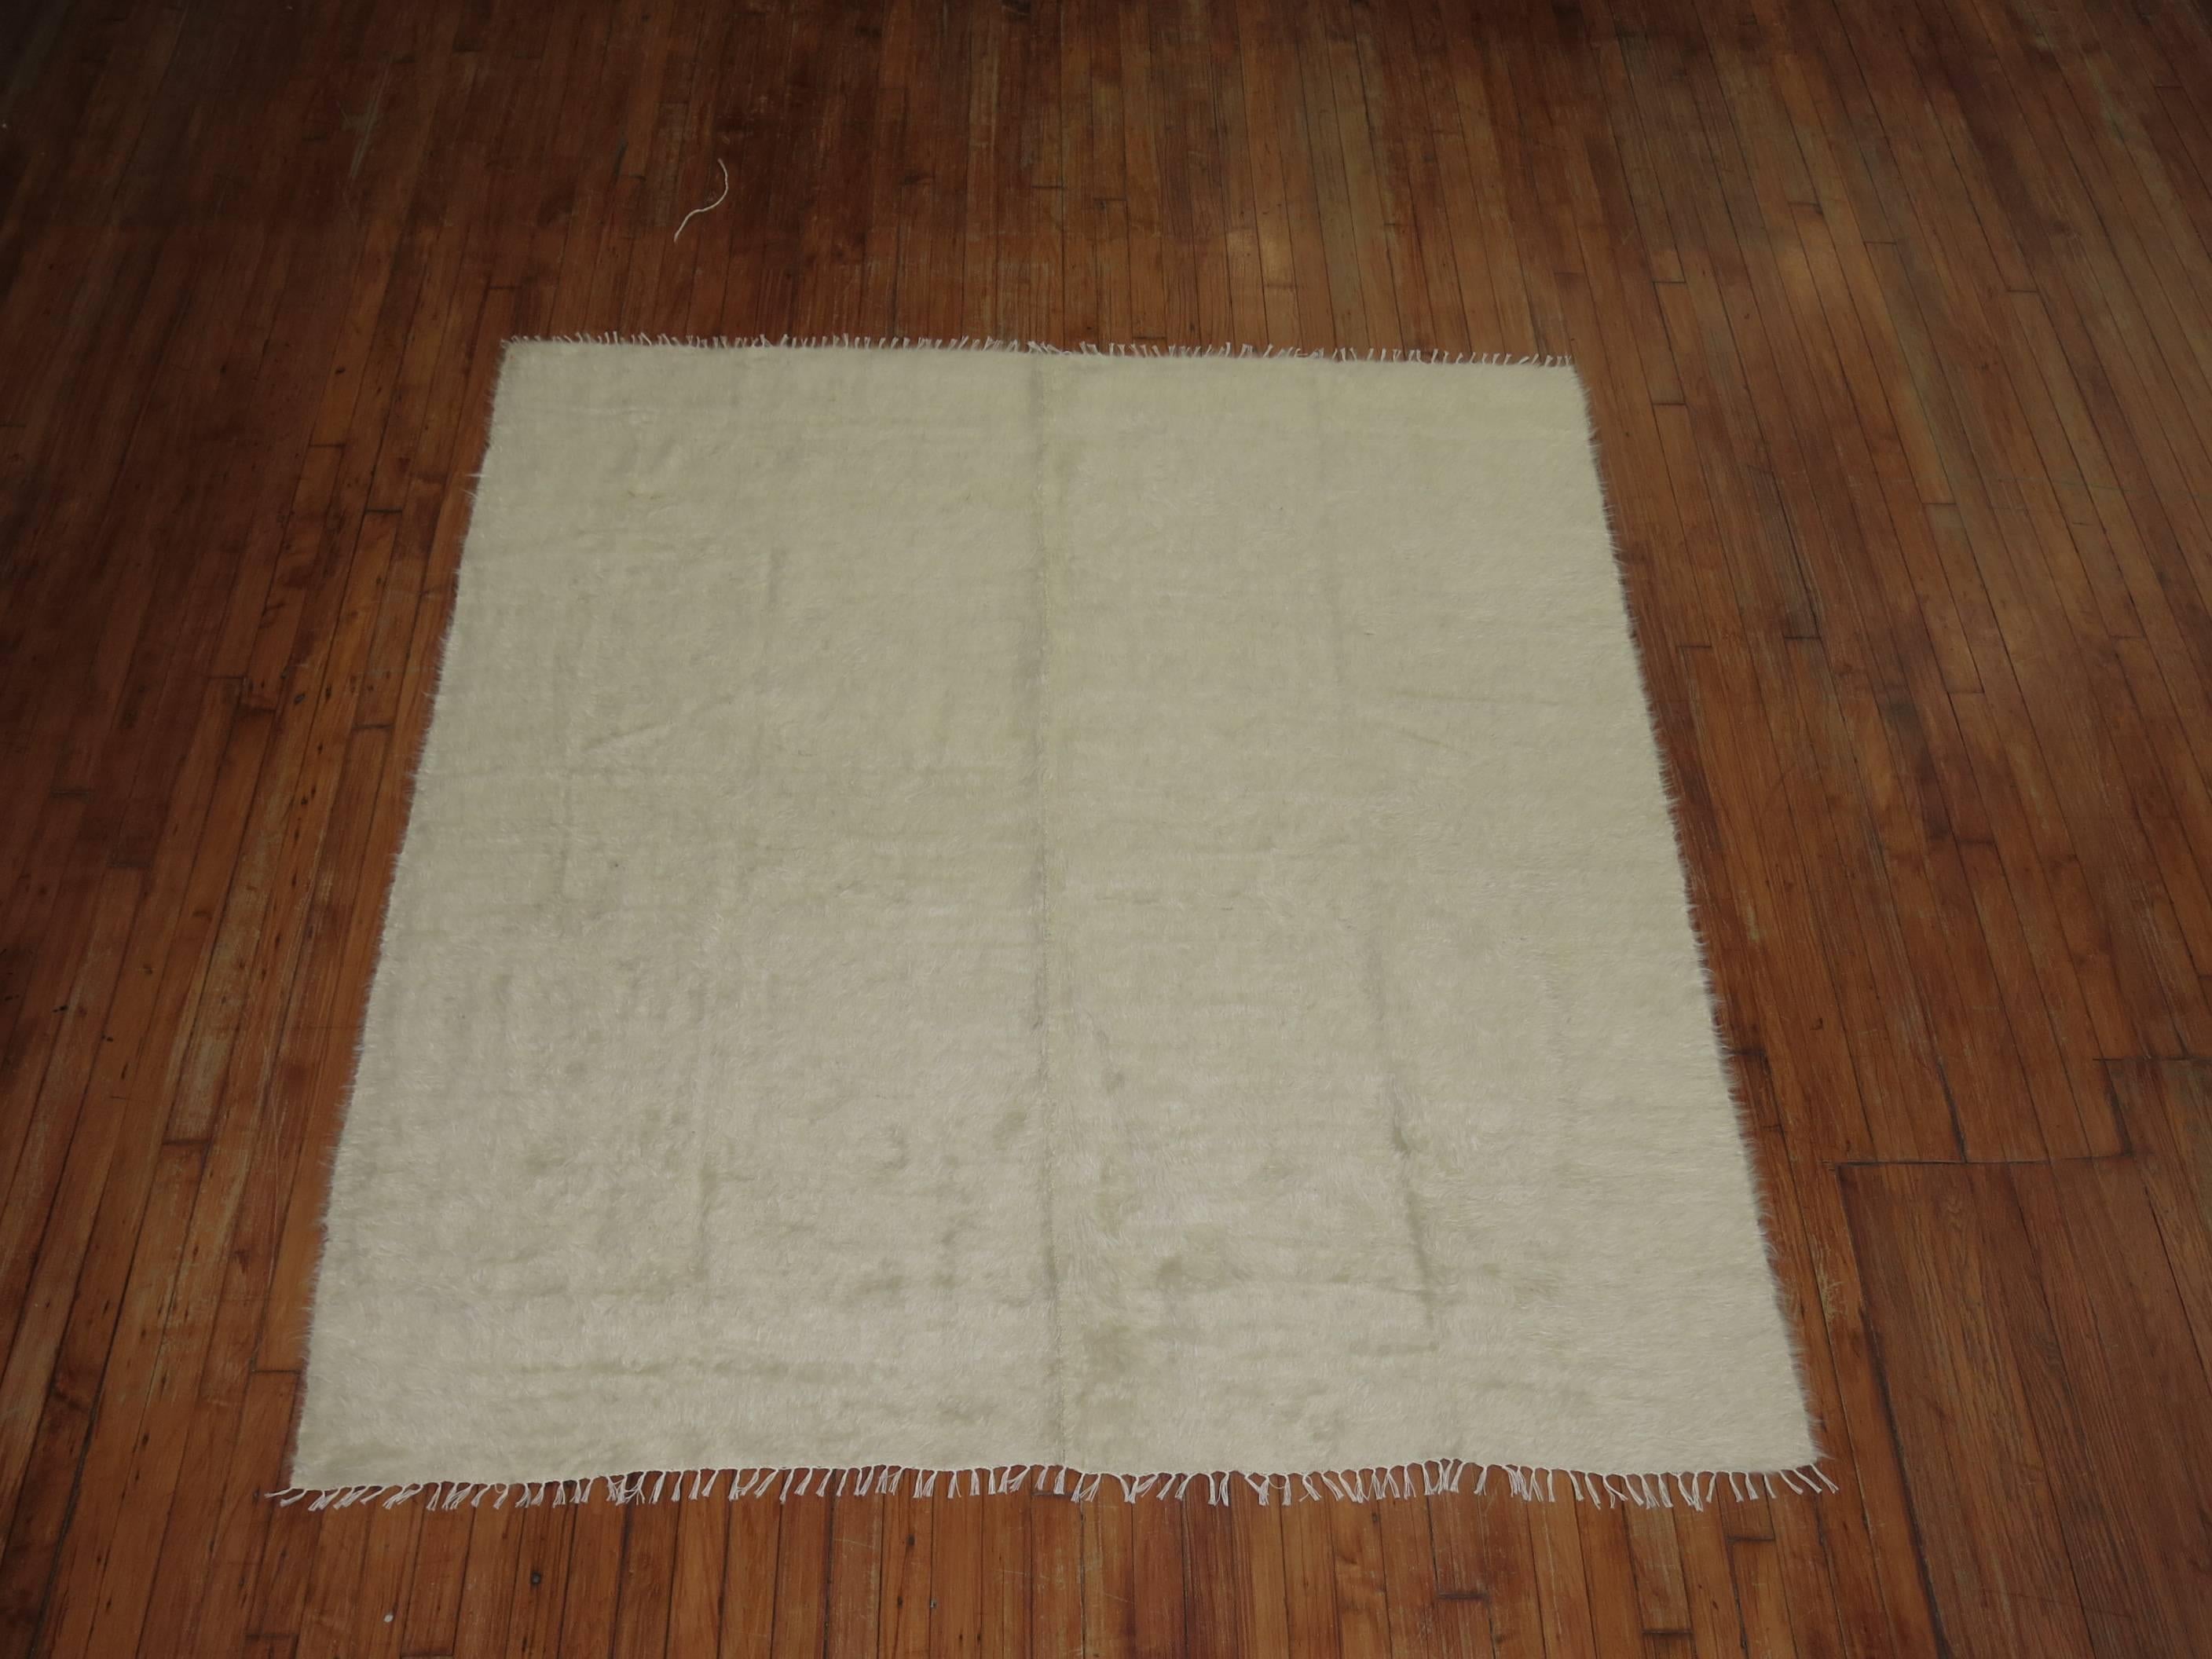 Square Size Vintage Mohair Wool Rug

5'10'' x 6'4''